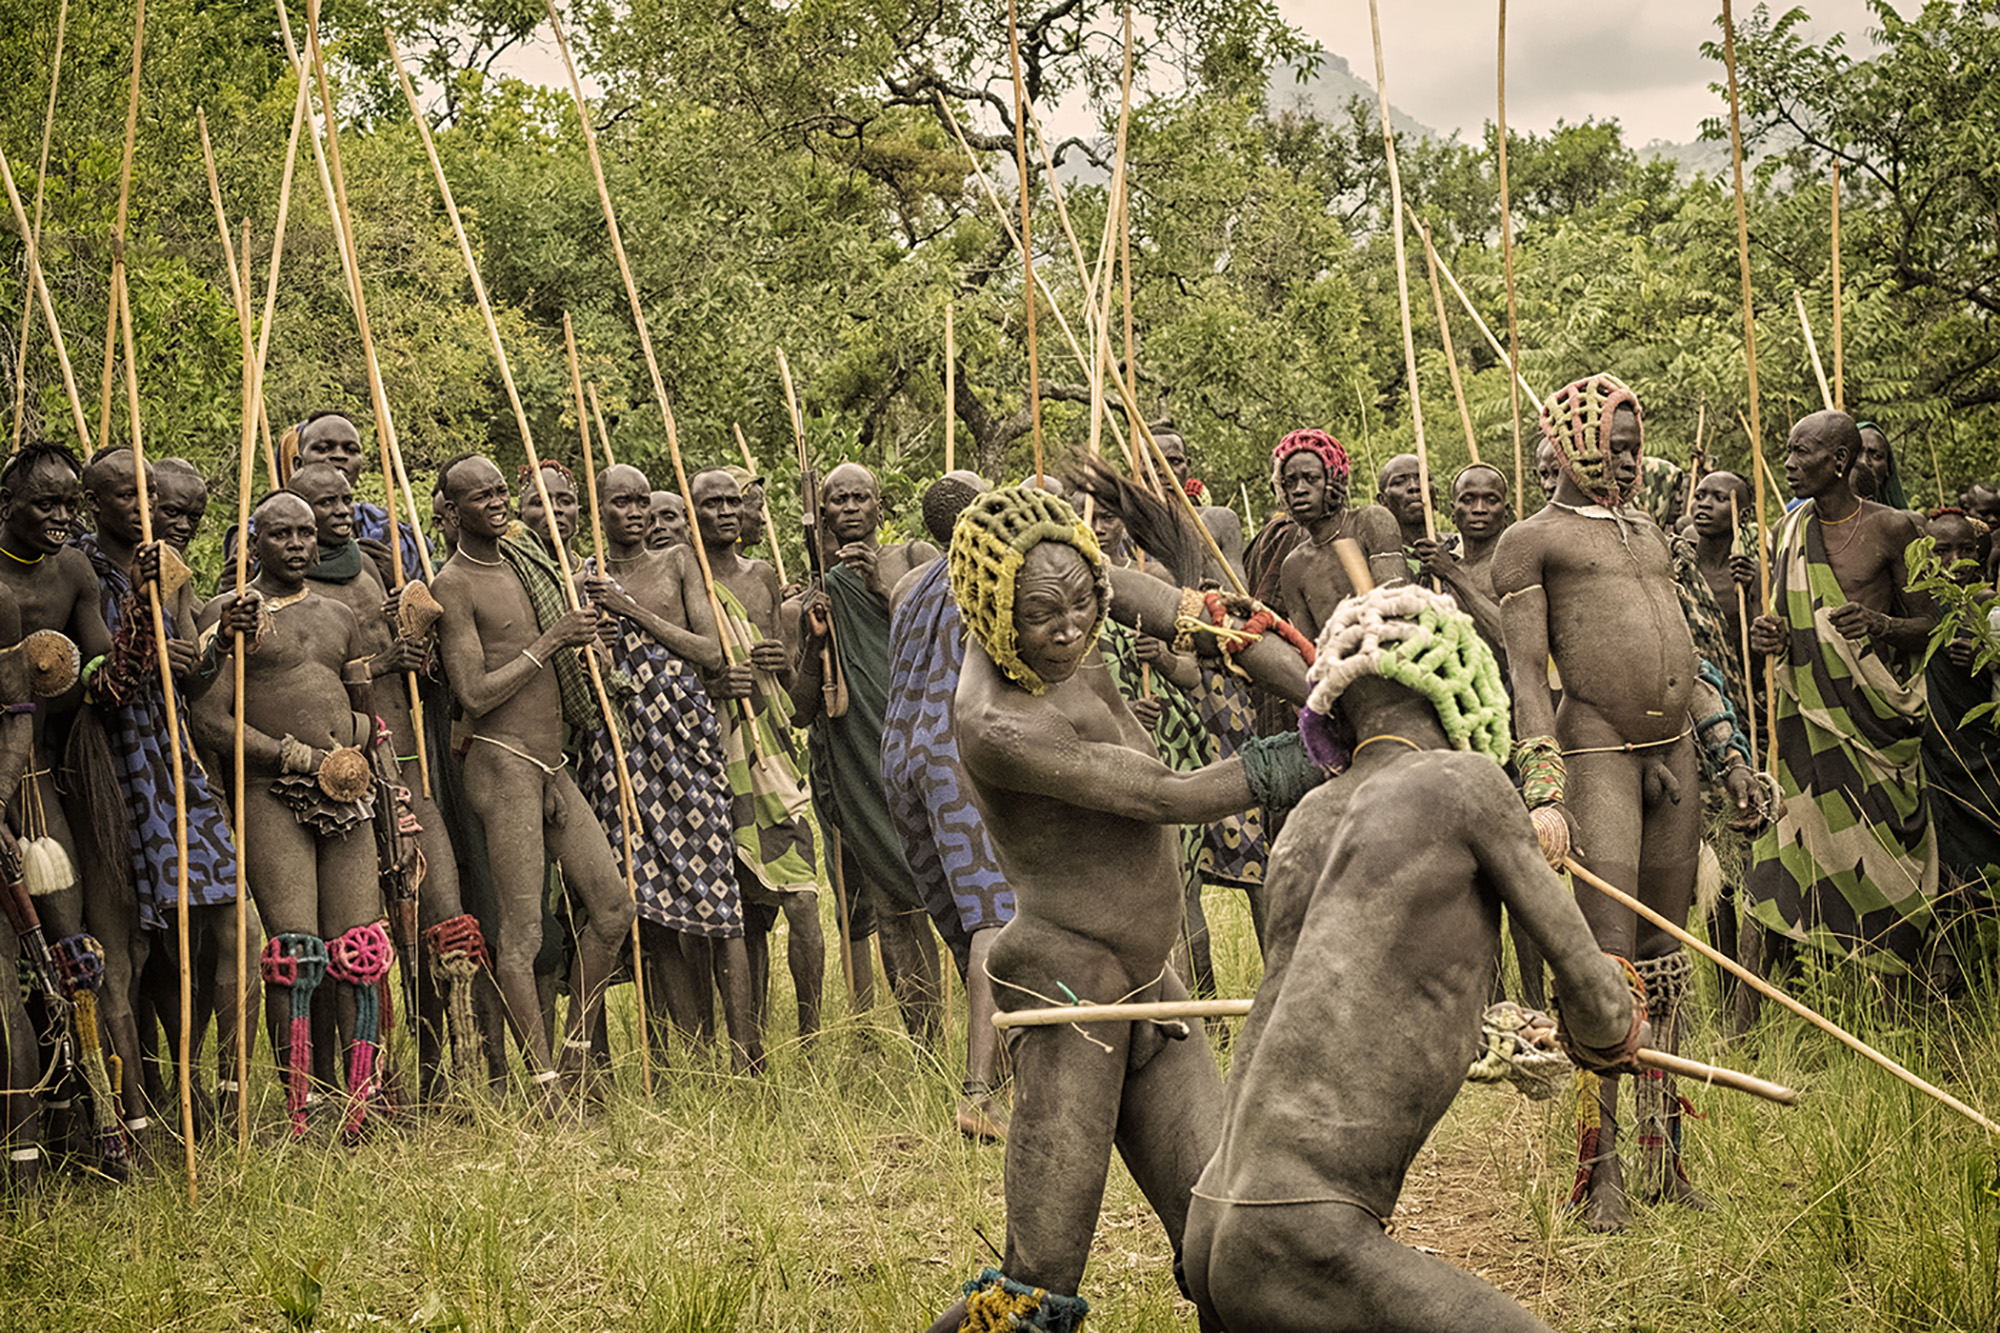 'Donga' - A traditional form of Suri stick fighting. Two men from opposite clans with beat each other mercilessly until the other yields. Donga is an opportunity for women who are looking to get married to scout out a potential husband. 